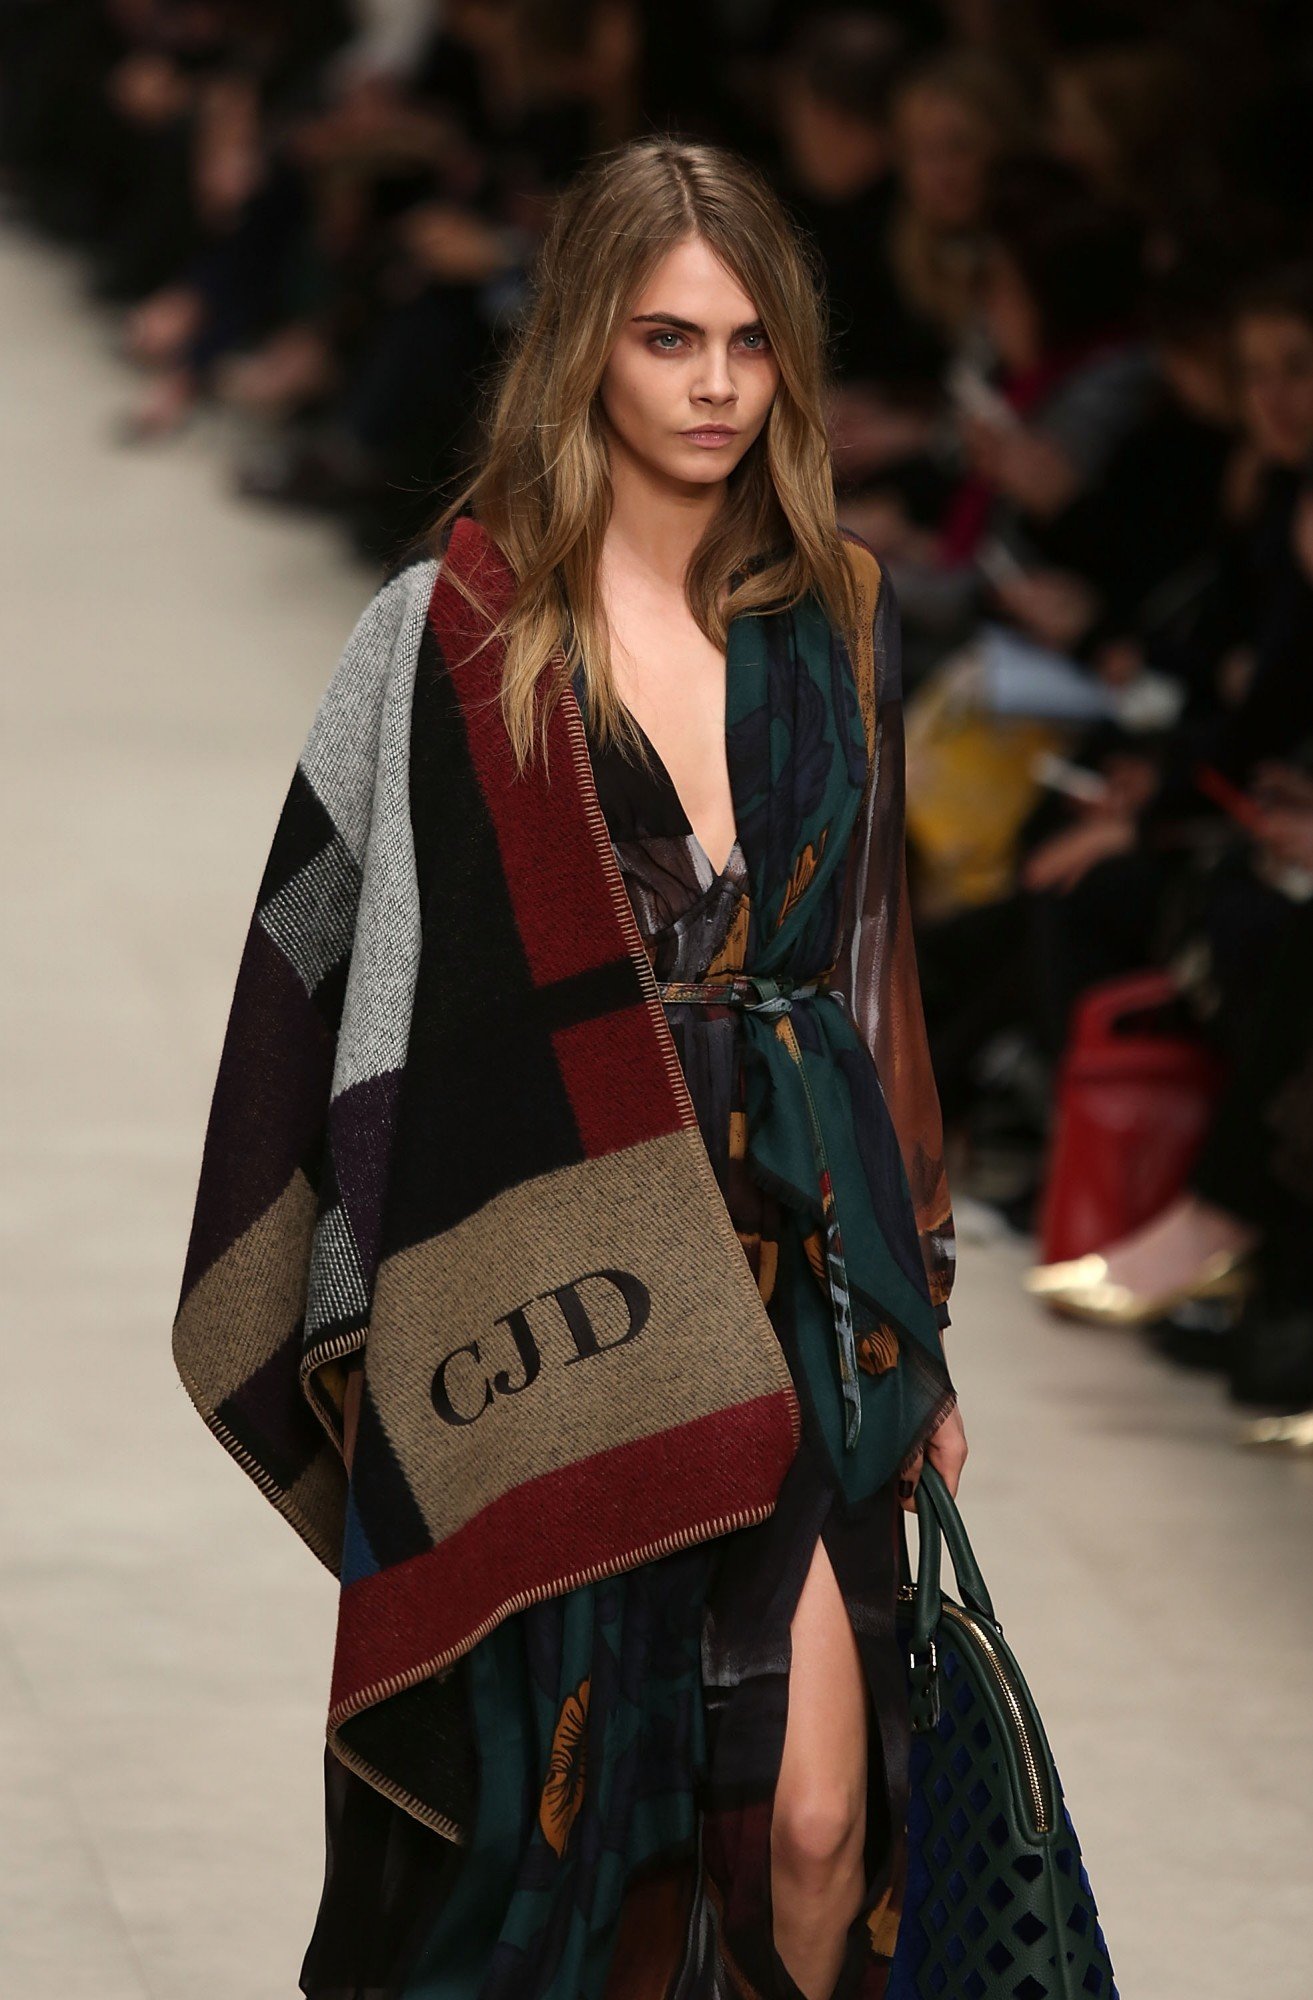 LONDON, ENGLAND - FEBRUARY 17: Model Cara Delevingne walks the runway at the Burberry Prorsum show at London Fashion Week AW14 at Perks Fields, Kensington Gardens on February 17, 2014 in London, England. (Photo by Tim P. Whitby/Getty Images)